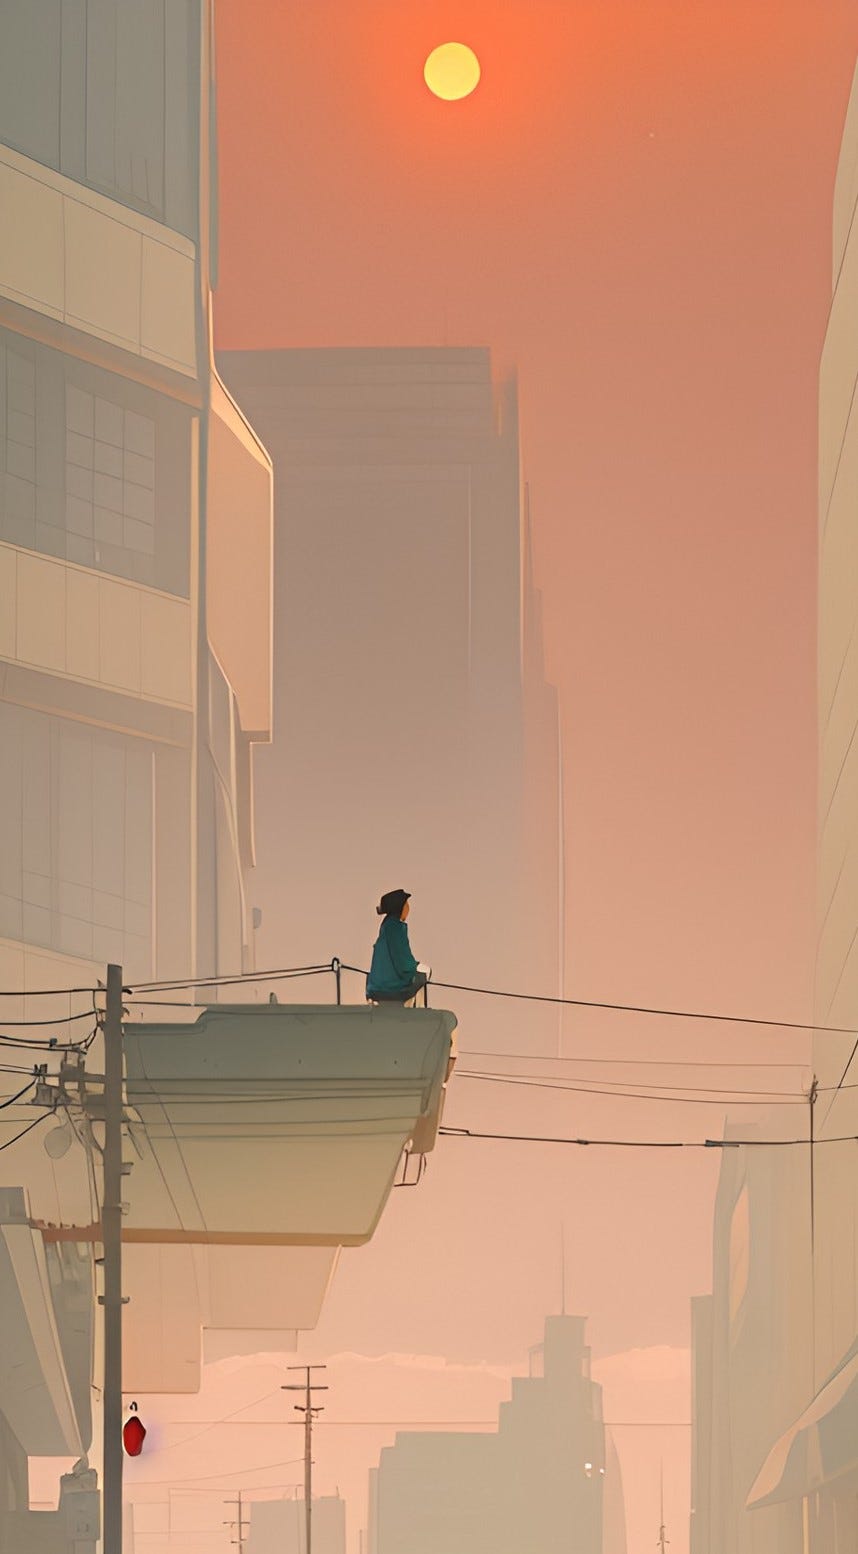 A.I. anime-style image of a woman standing on a balcony looking up at the sun through the haze over a desolate urban landscape